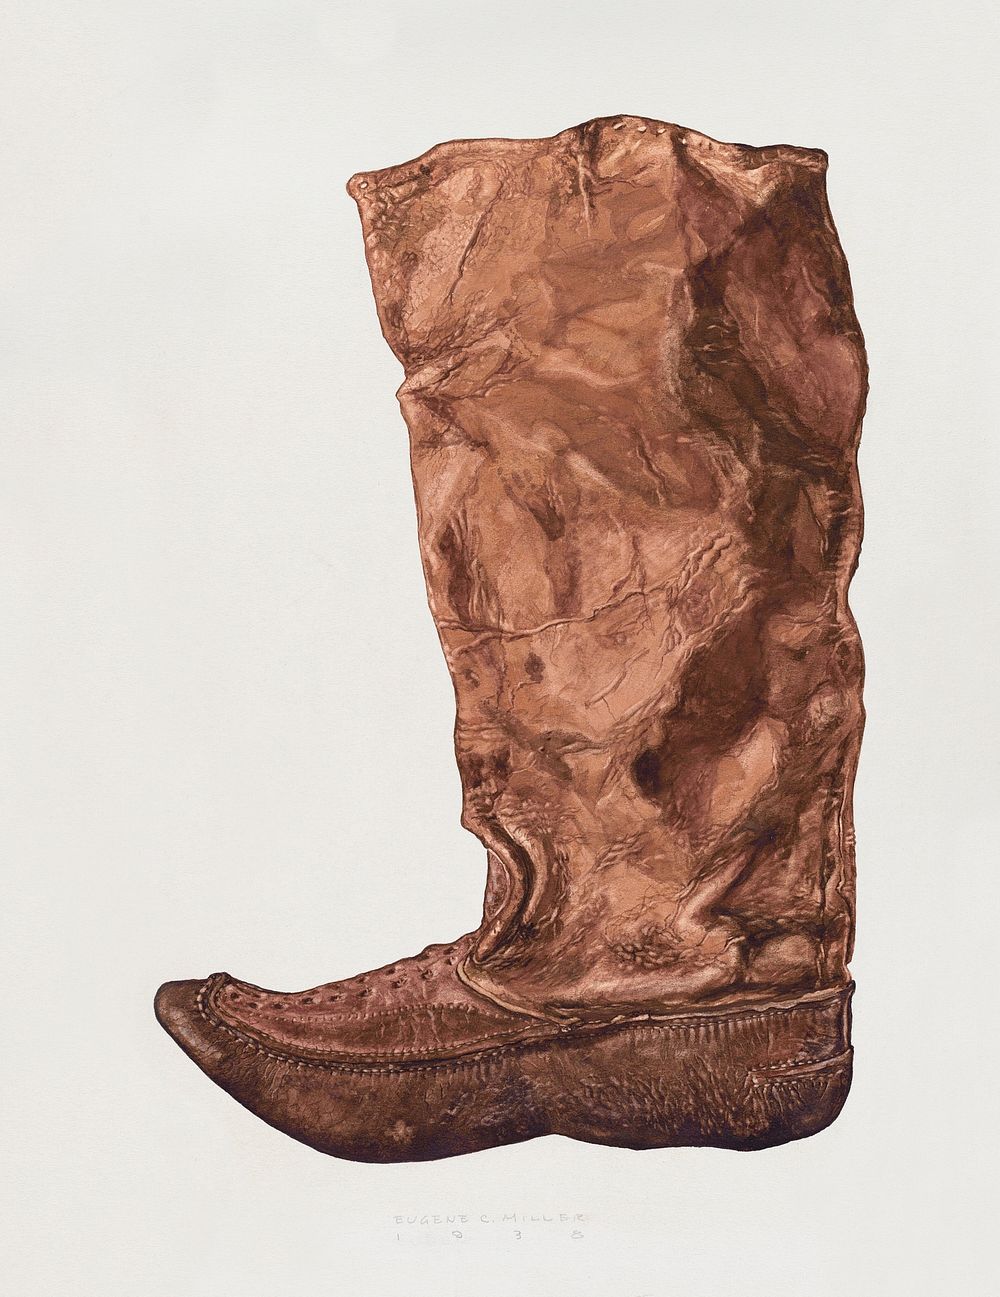 Boot (1938) by Eugene C. Miller. Original from The National Gallery of Art. Digitally enhanced by rawpixel.